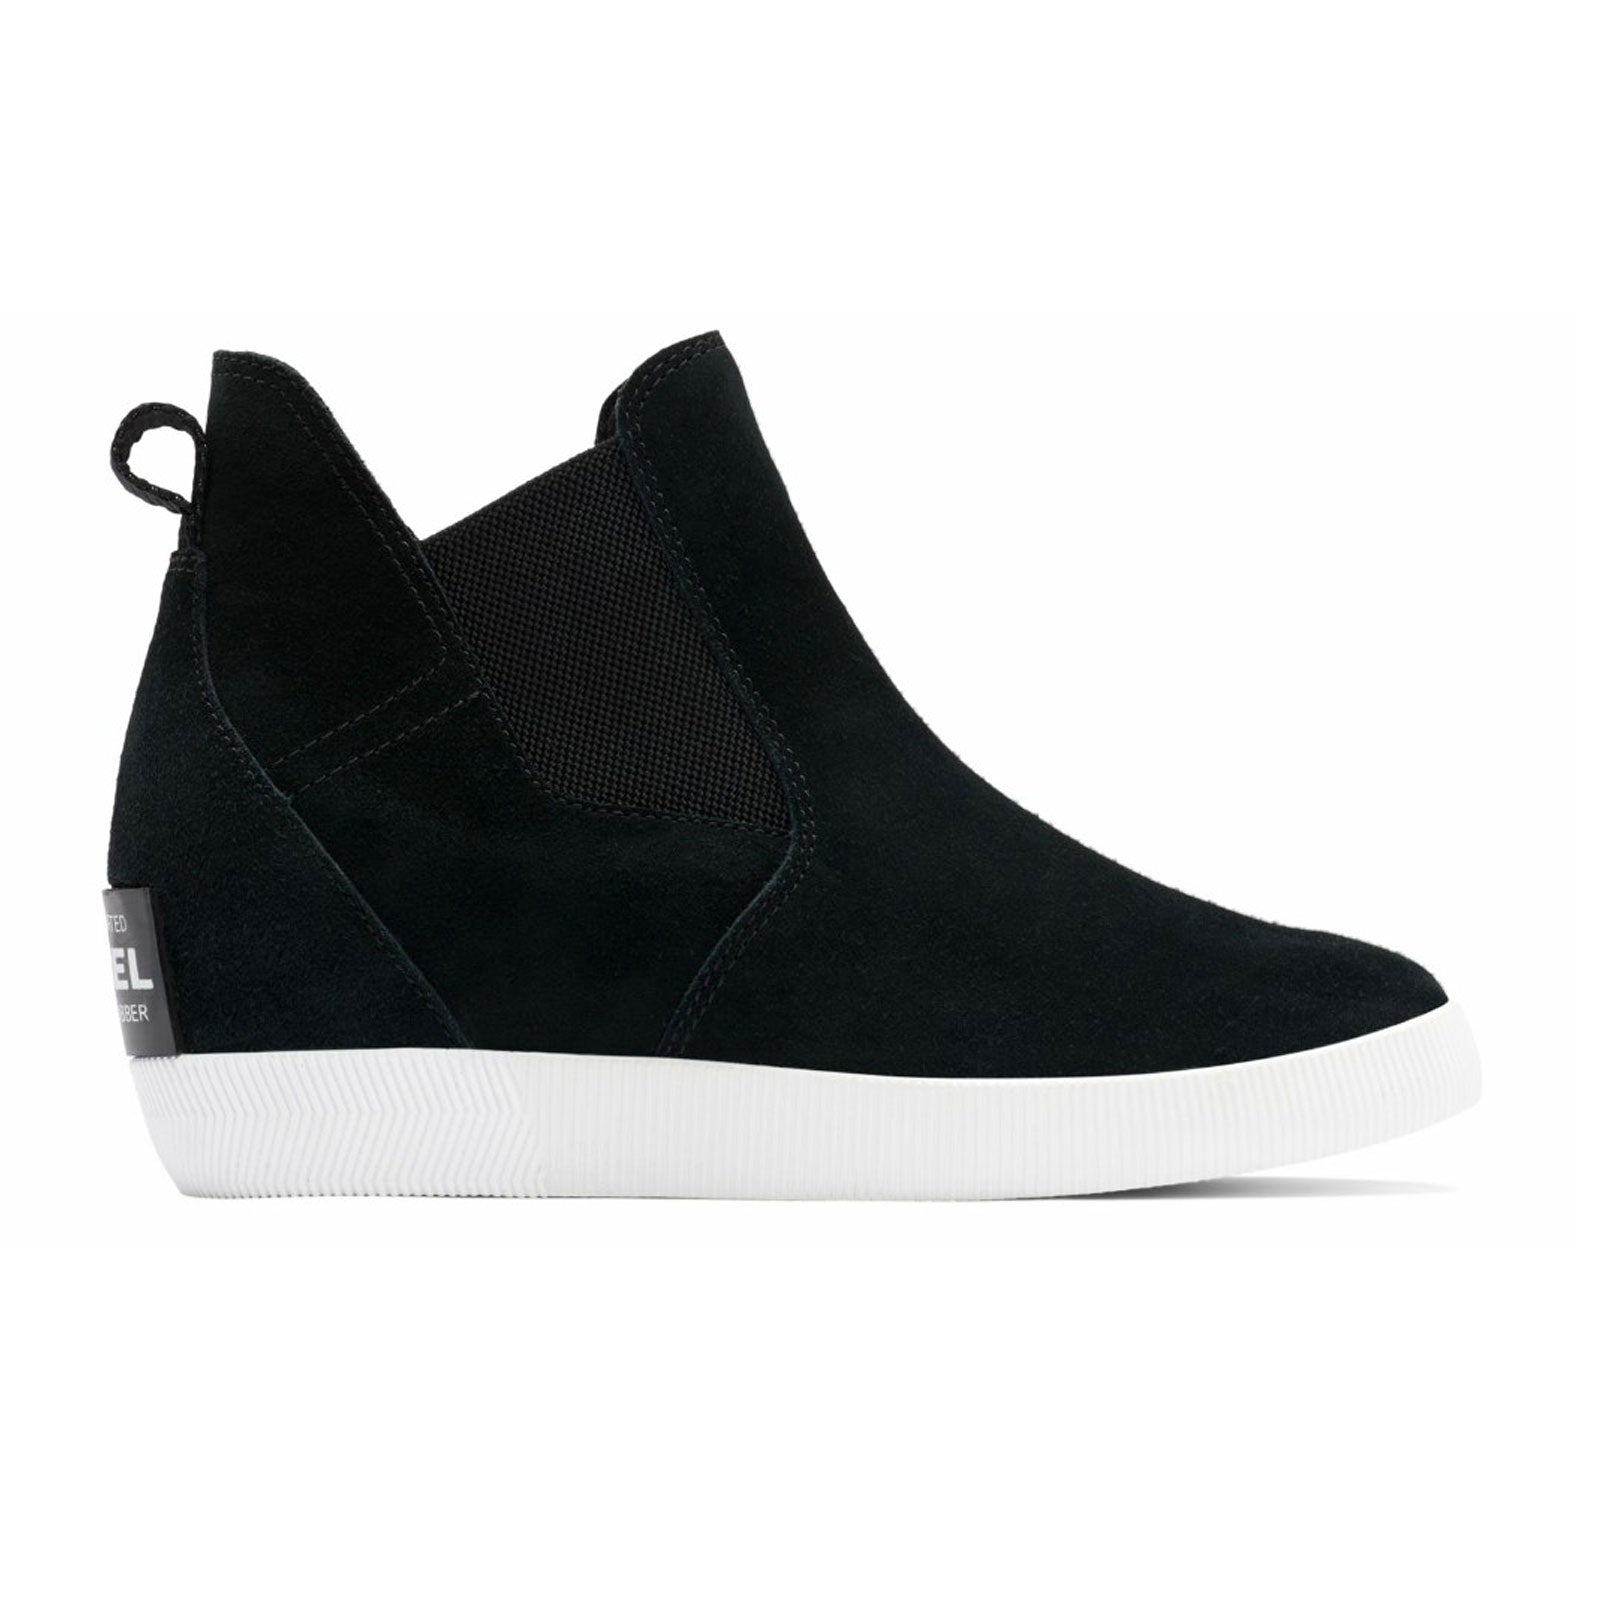 Sorel, Sorel Out N About Slip-On Wedge (Donna) - Nero/Bianco